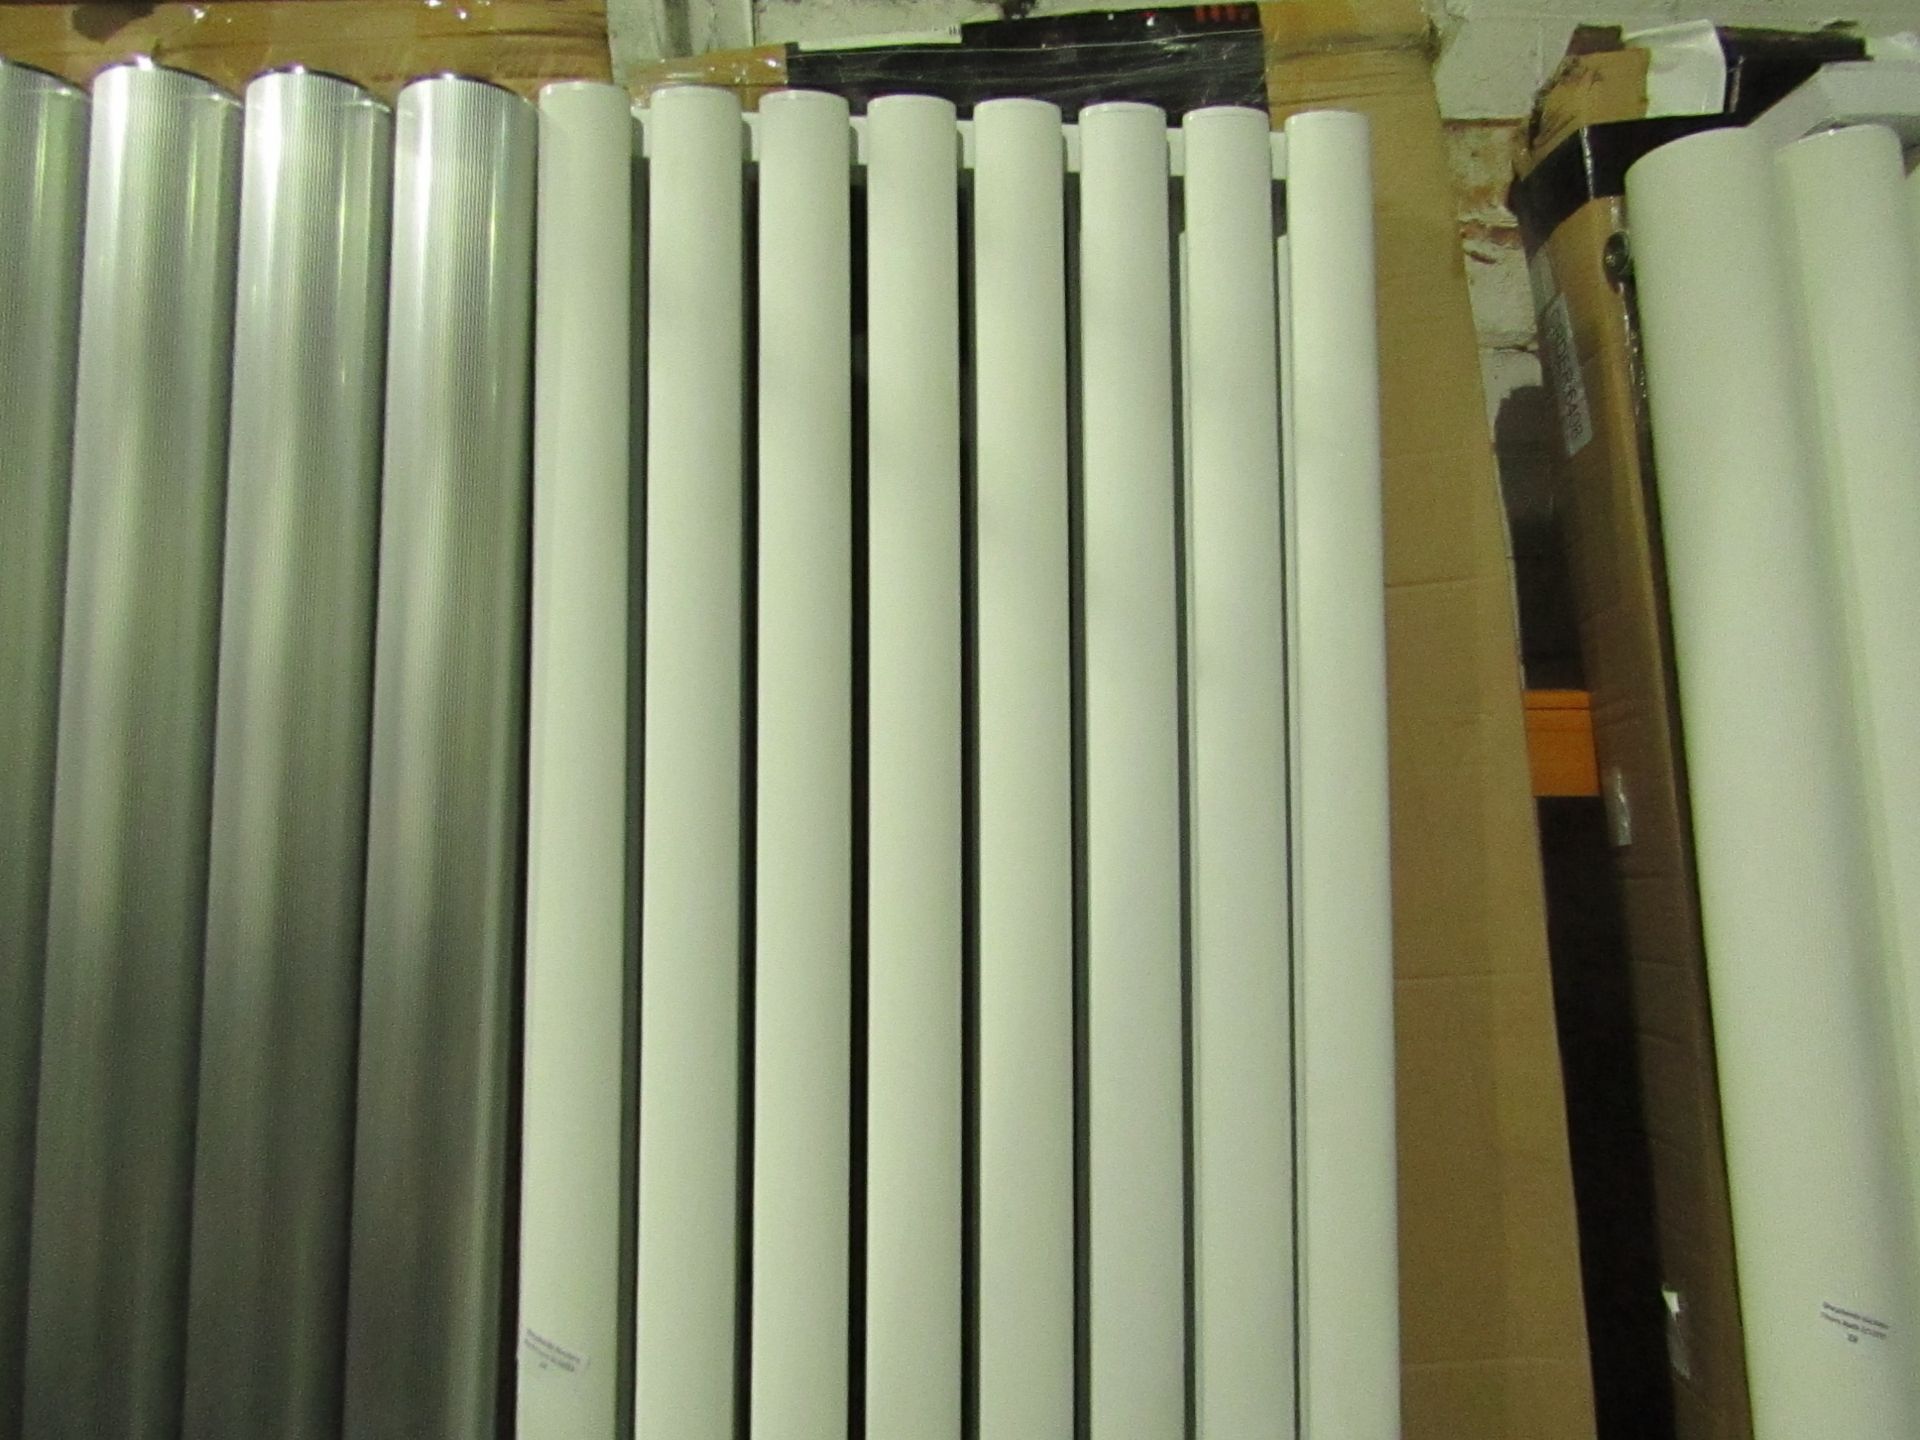 Carisa Tallis Double XL 1800x470 designer radiator, this item is ex display, it may have marks but